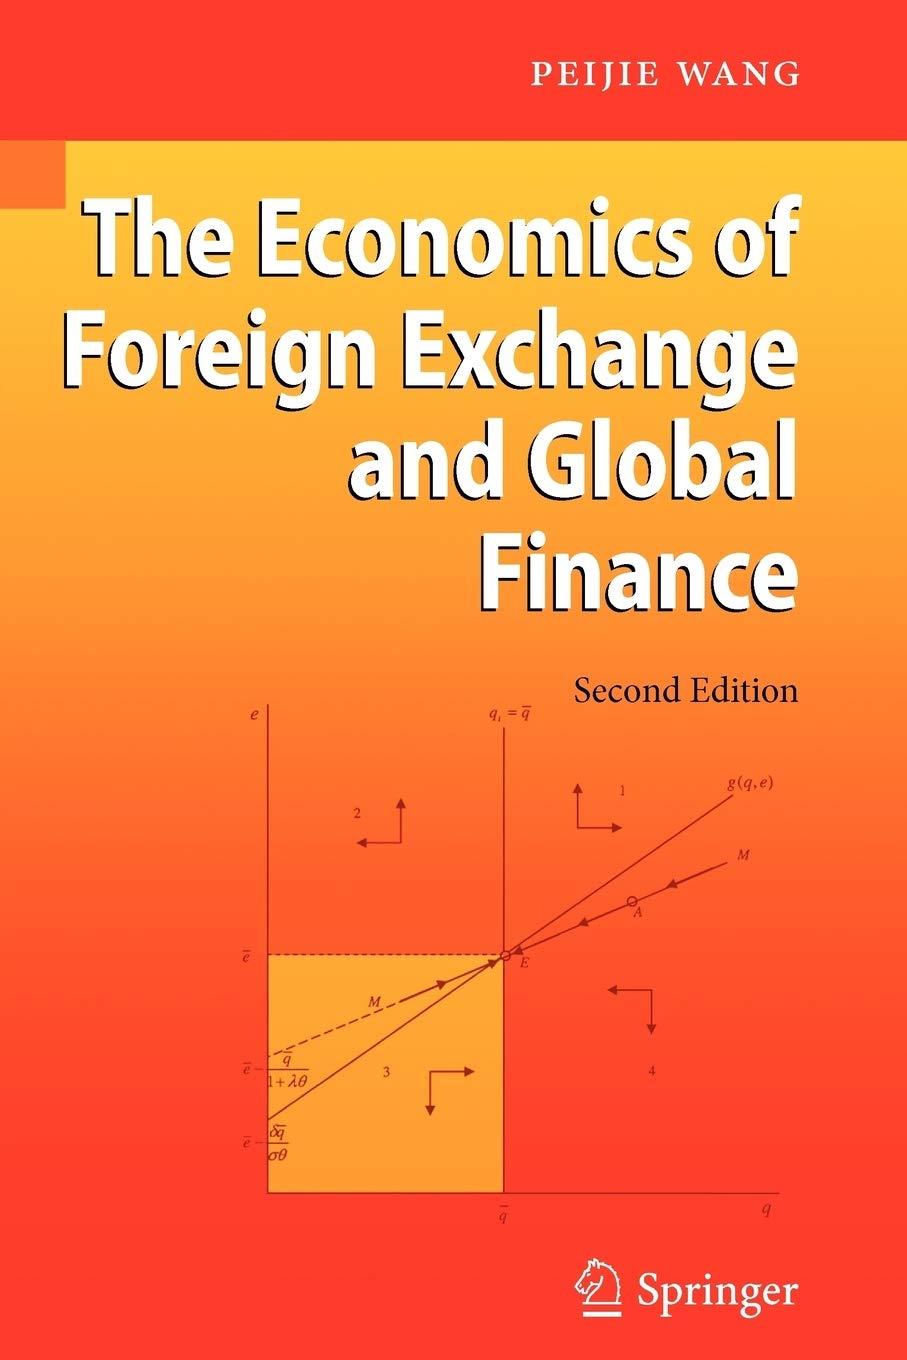 the economics of foreign exchange and global finance 2nd edition peijie wang 364211136x, 978-3642111365